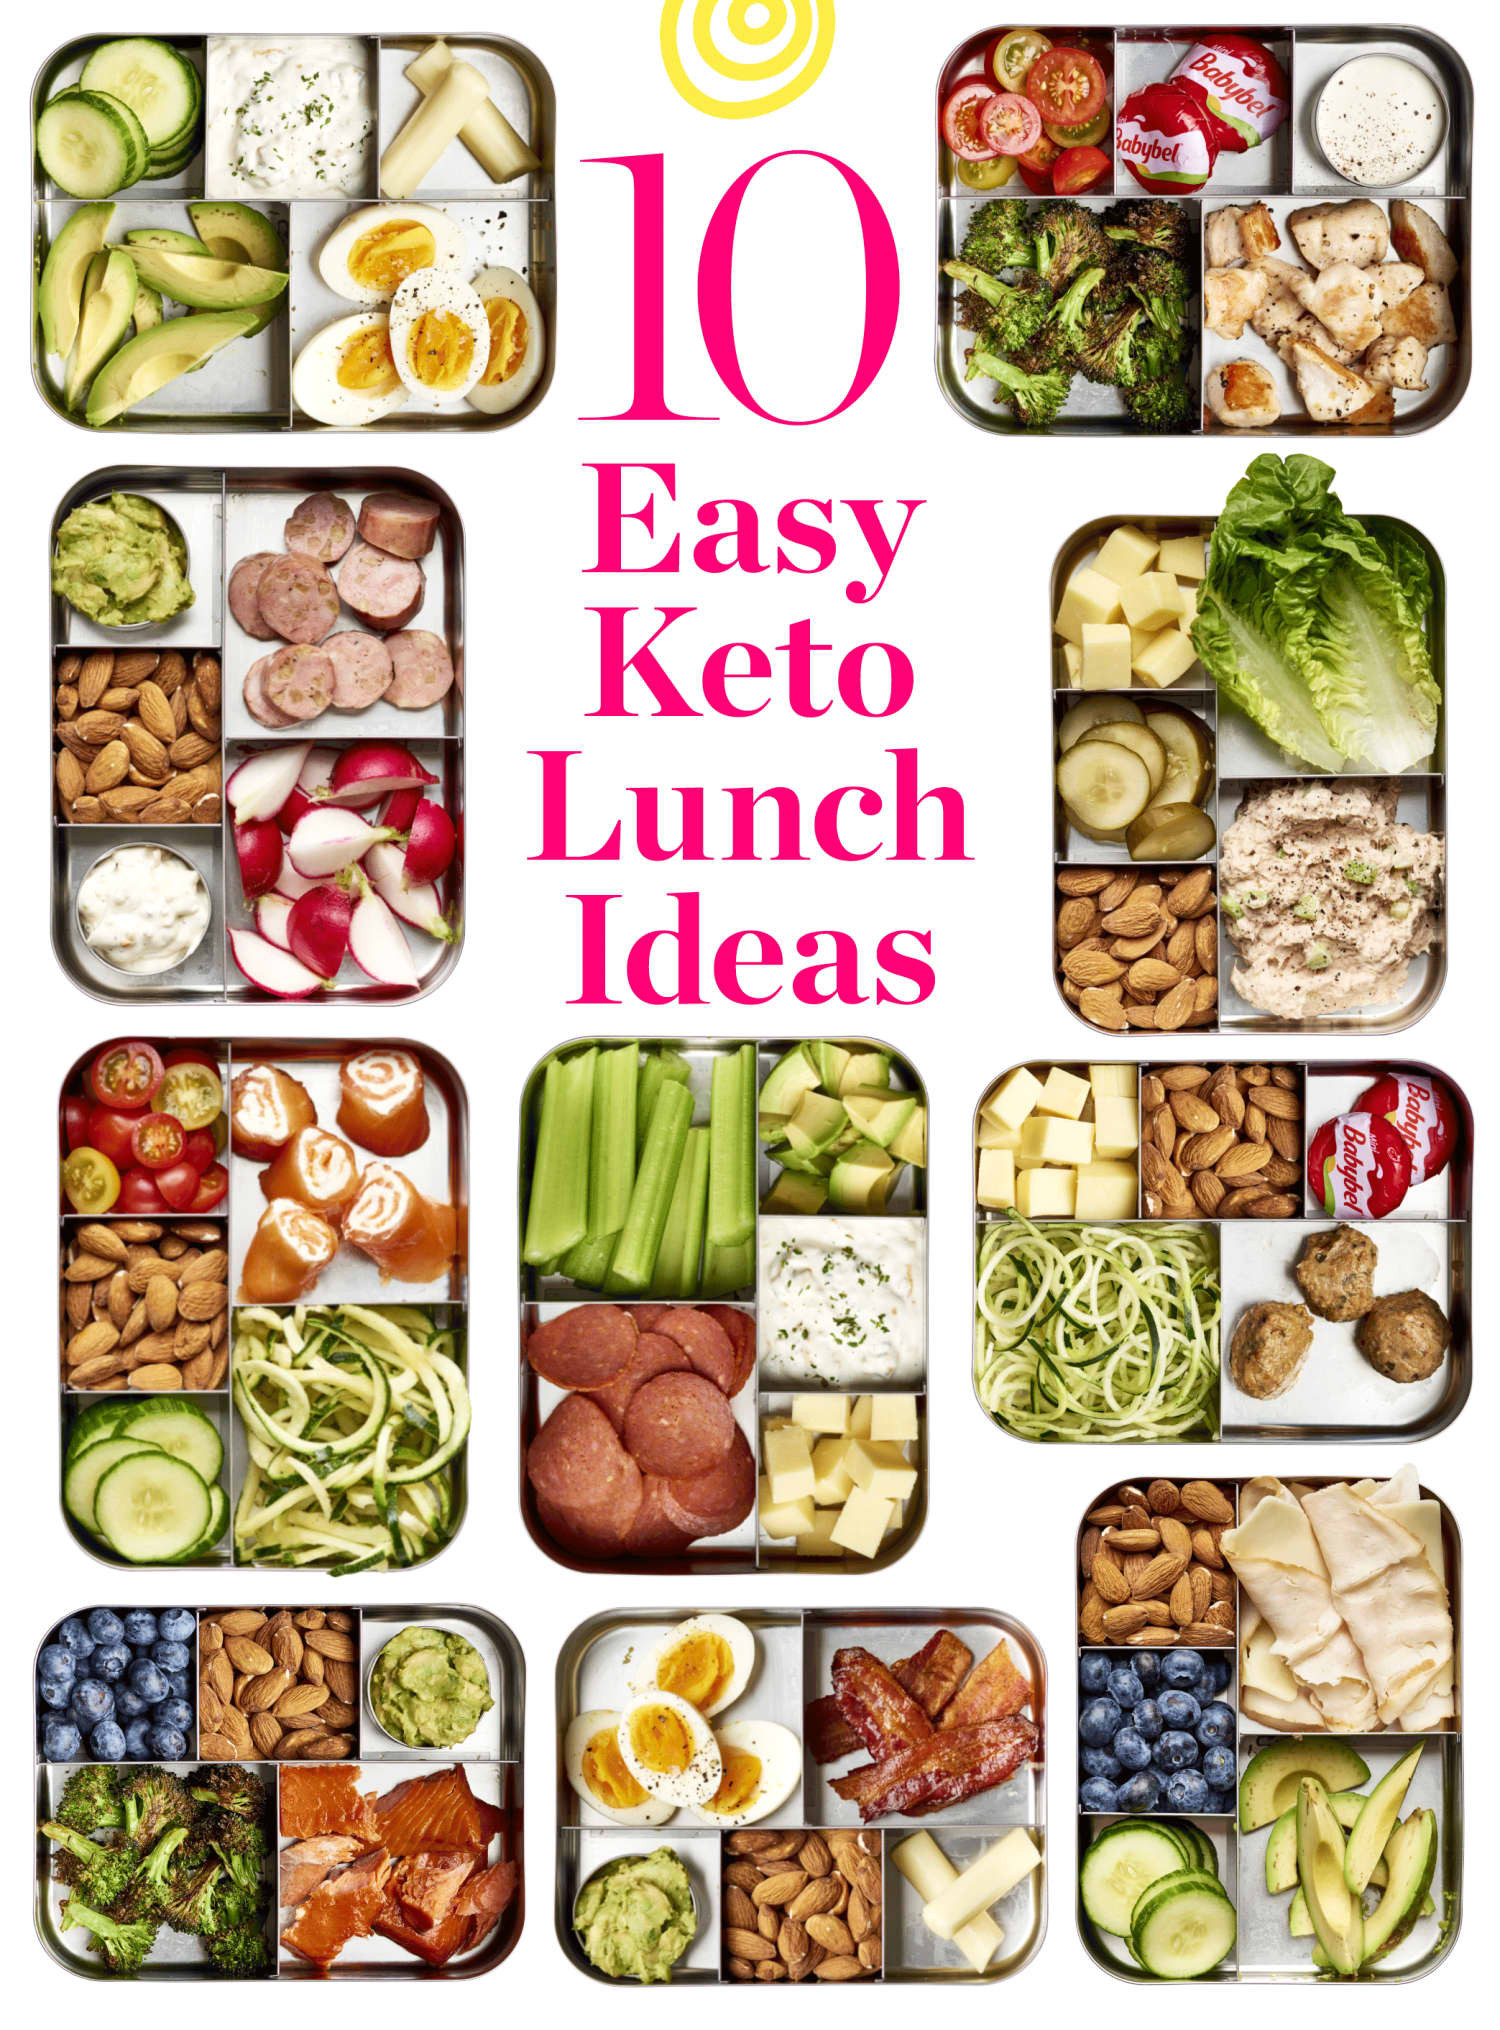 Healthy Keto Lunches For Work
 10 Easy Keto Lunch Ideas with Net Carb Counts